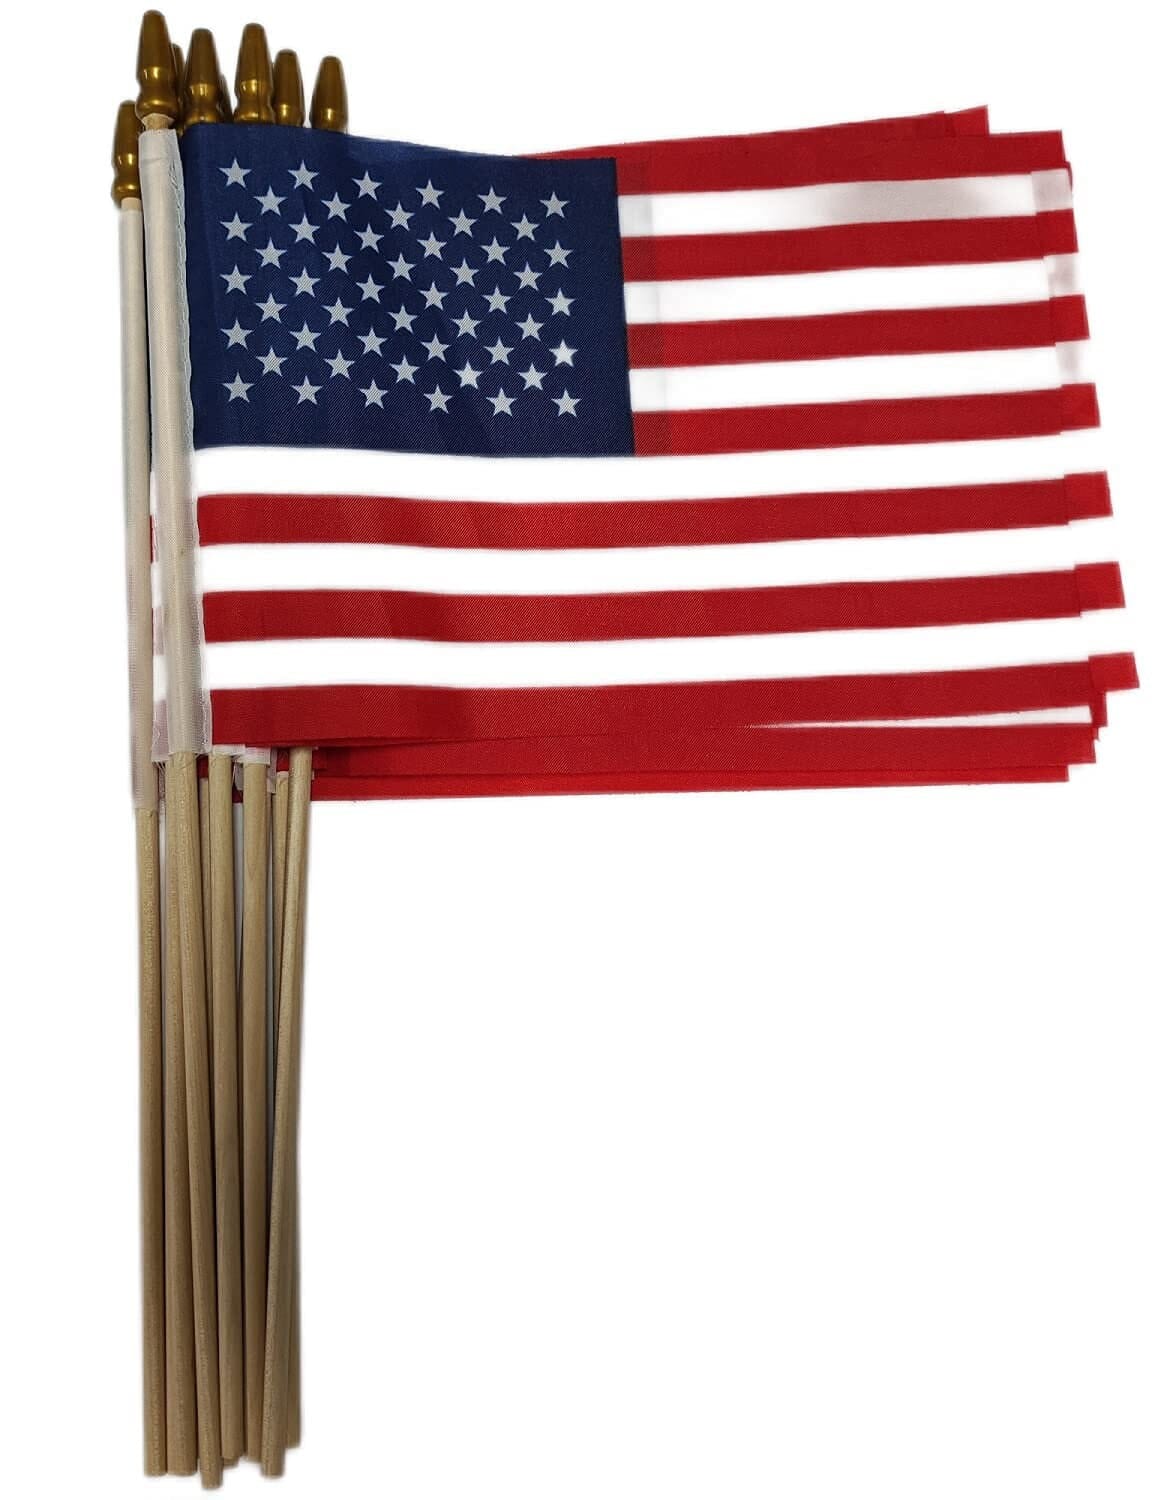 10 mini American flags with wood stick